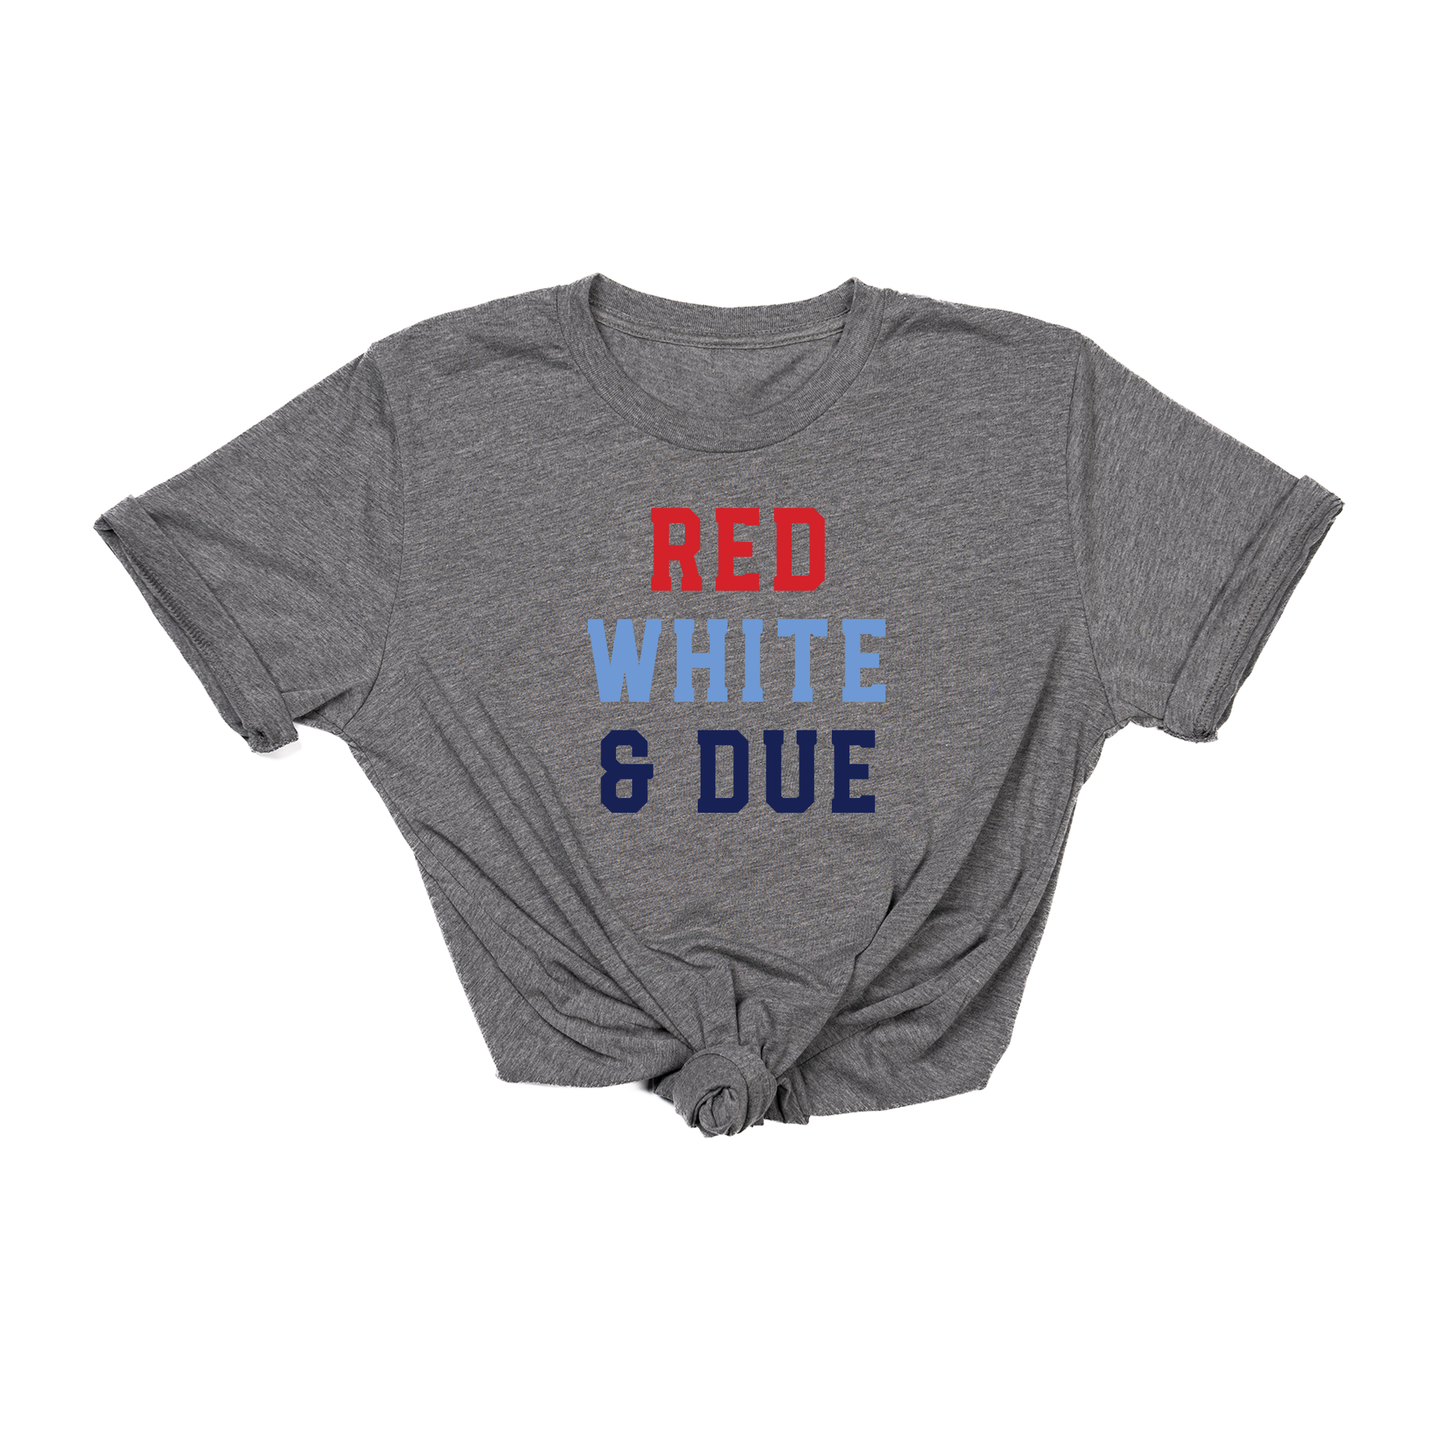 Red, White, & Due - Tee (Gray)